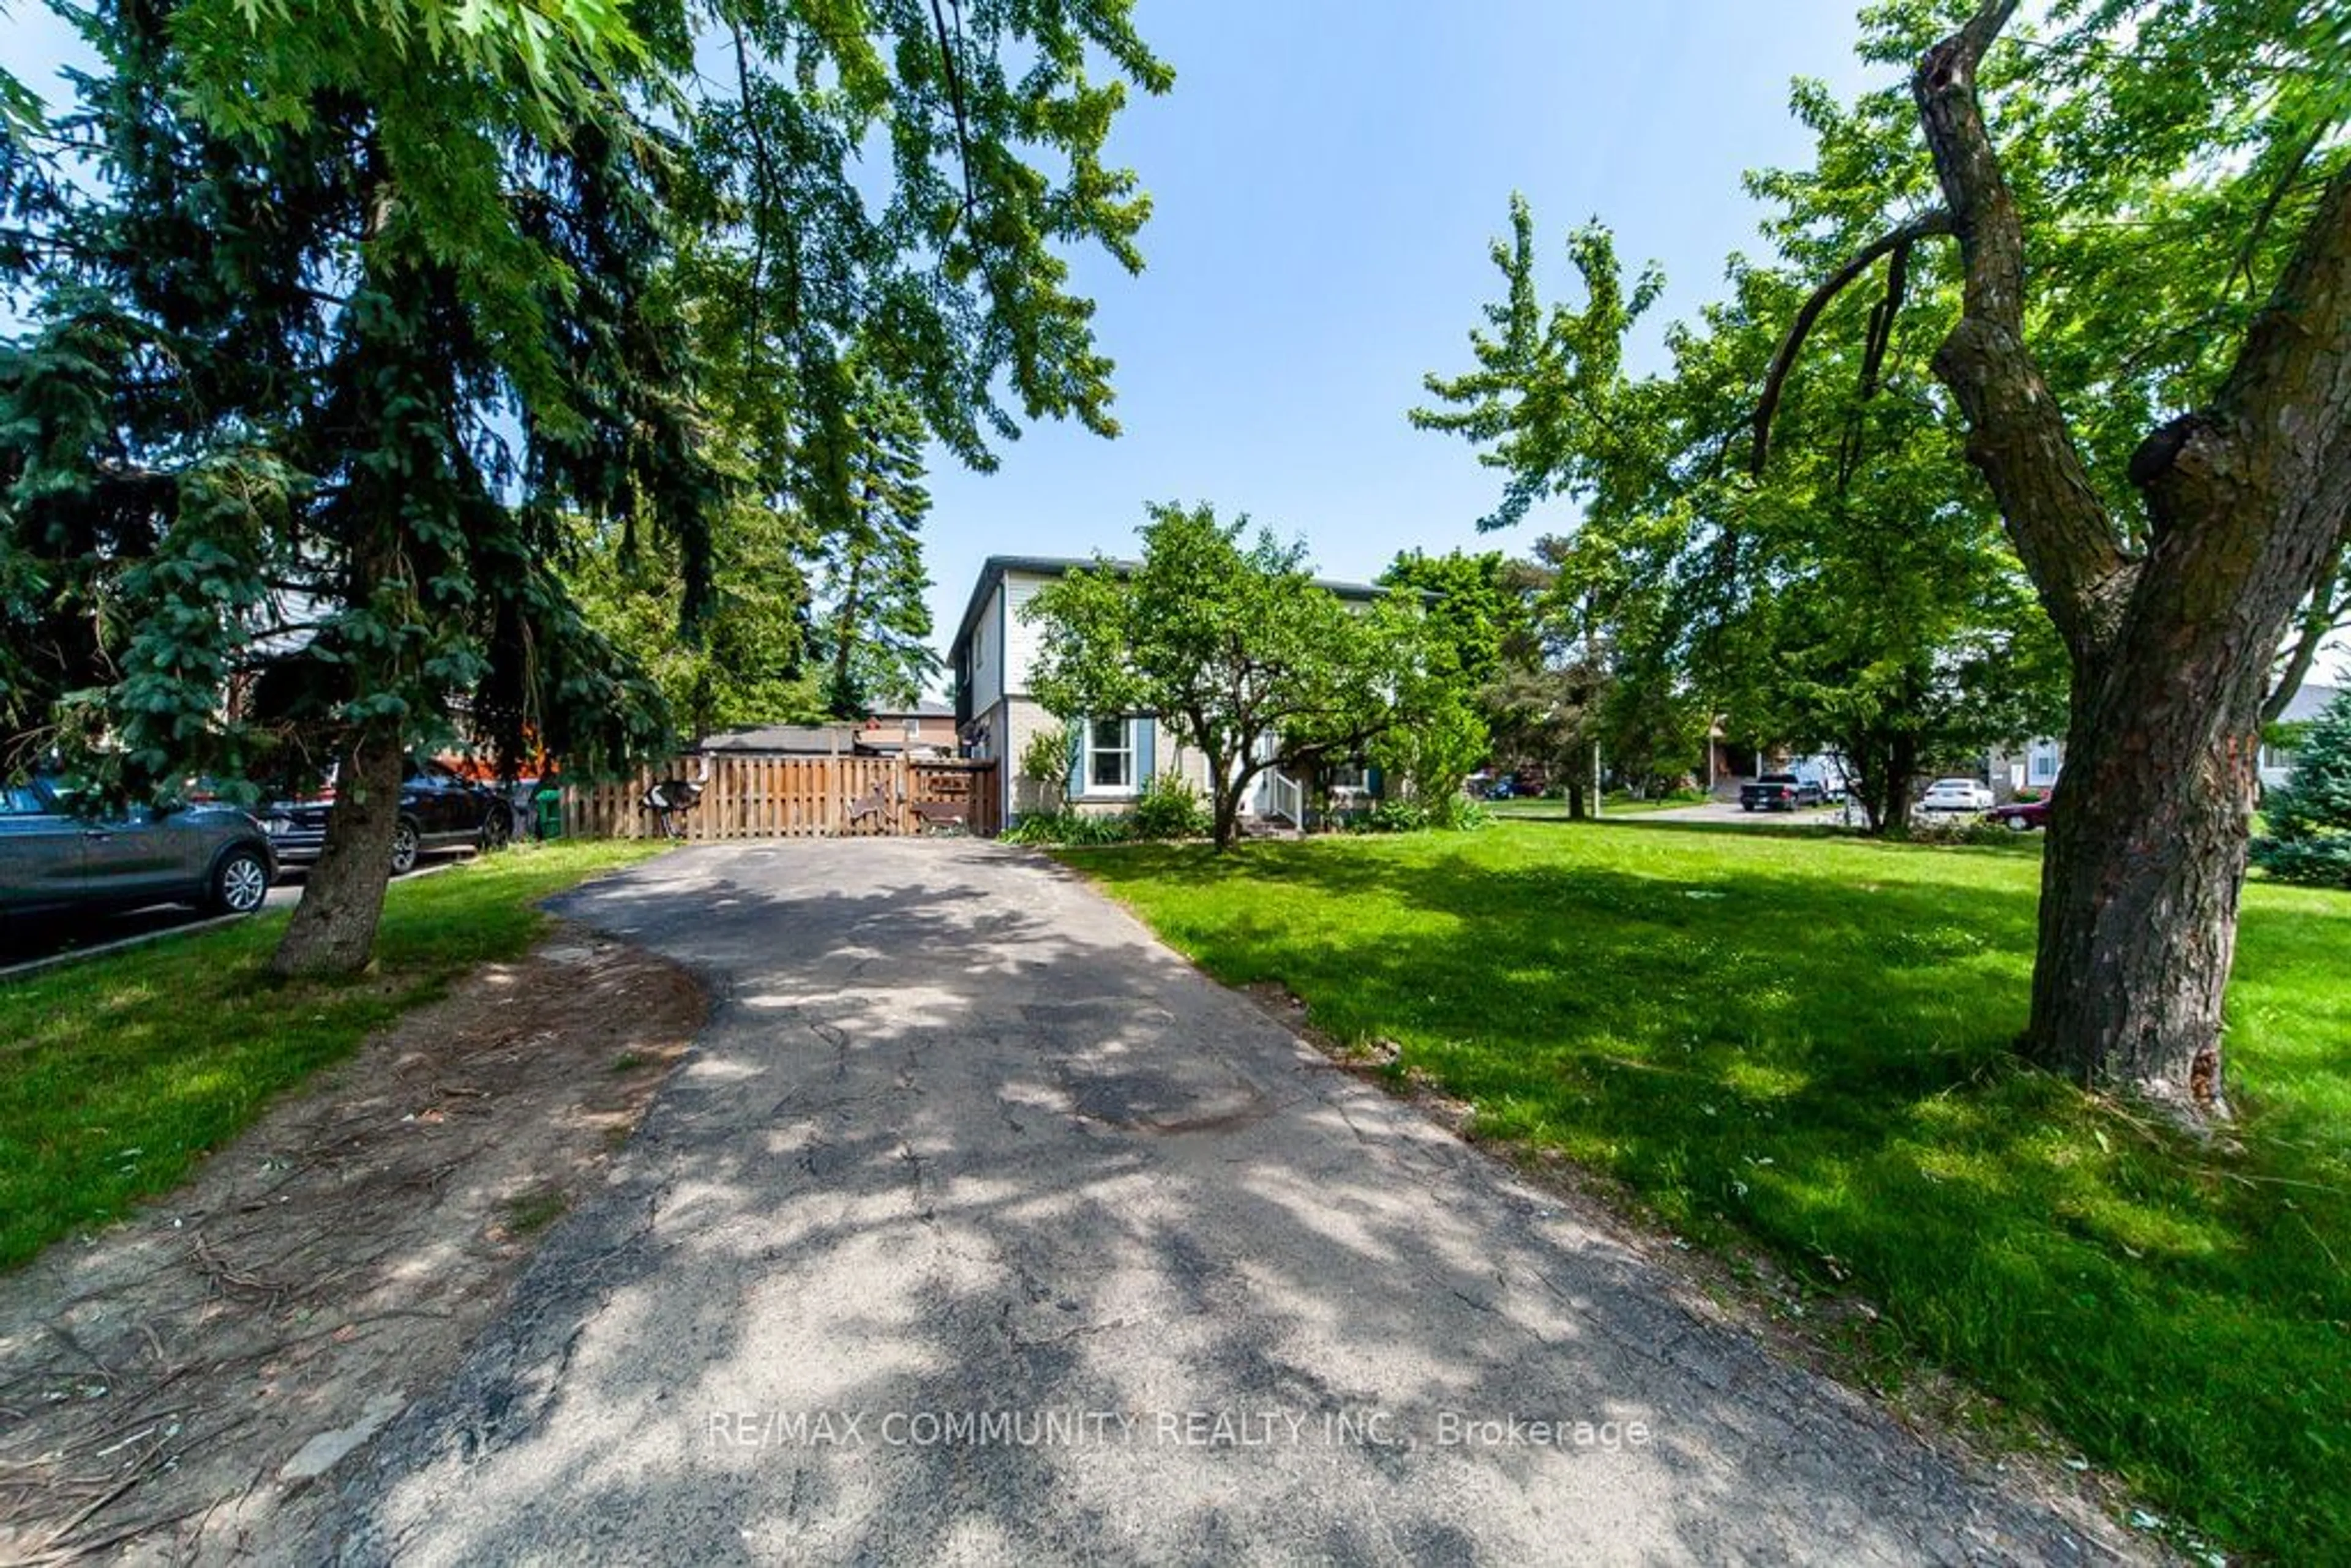 Street view for 54 Earlsdale Cres, Brampton Ontario L6T 3A8